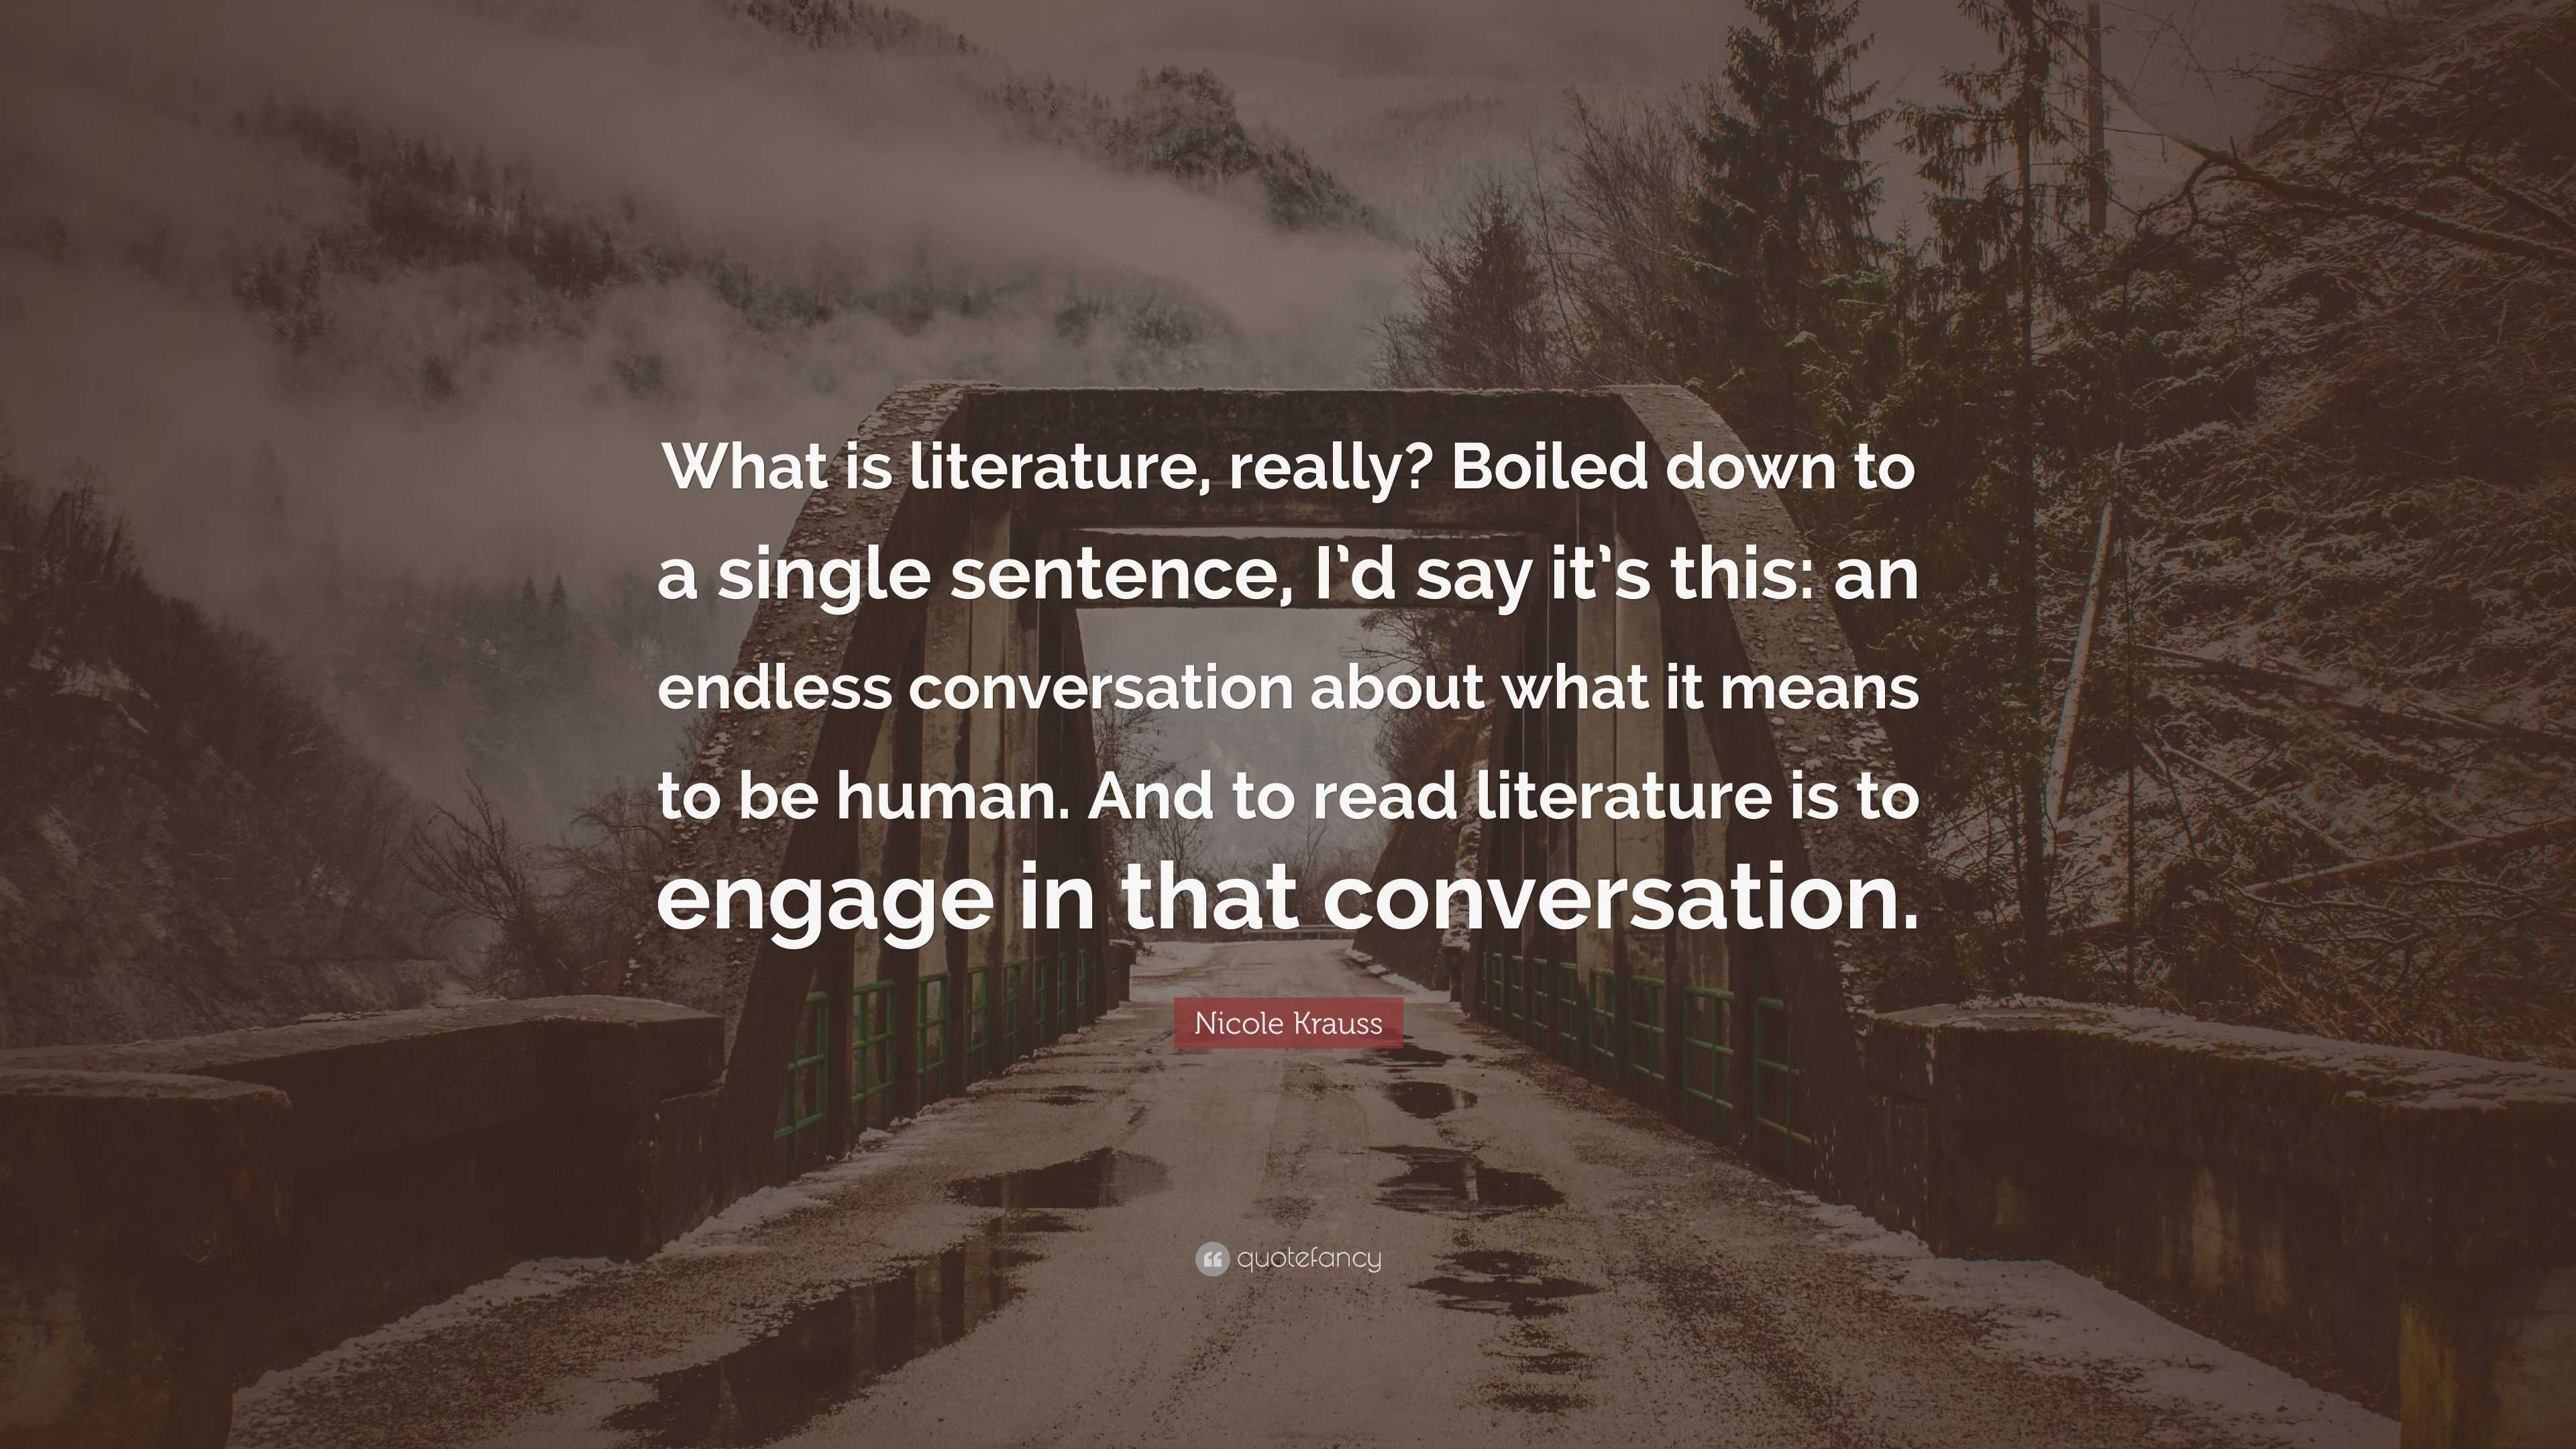 Nicole Krauss Quote: “What is literature, really? Boiled down to a ...